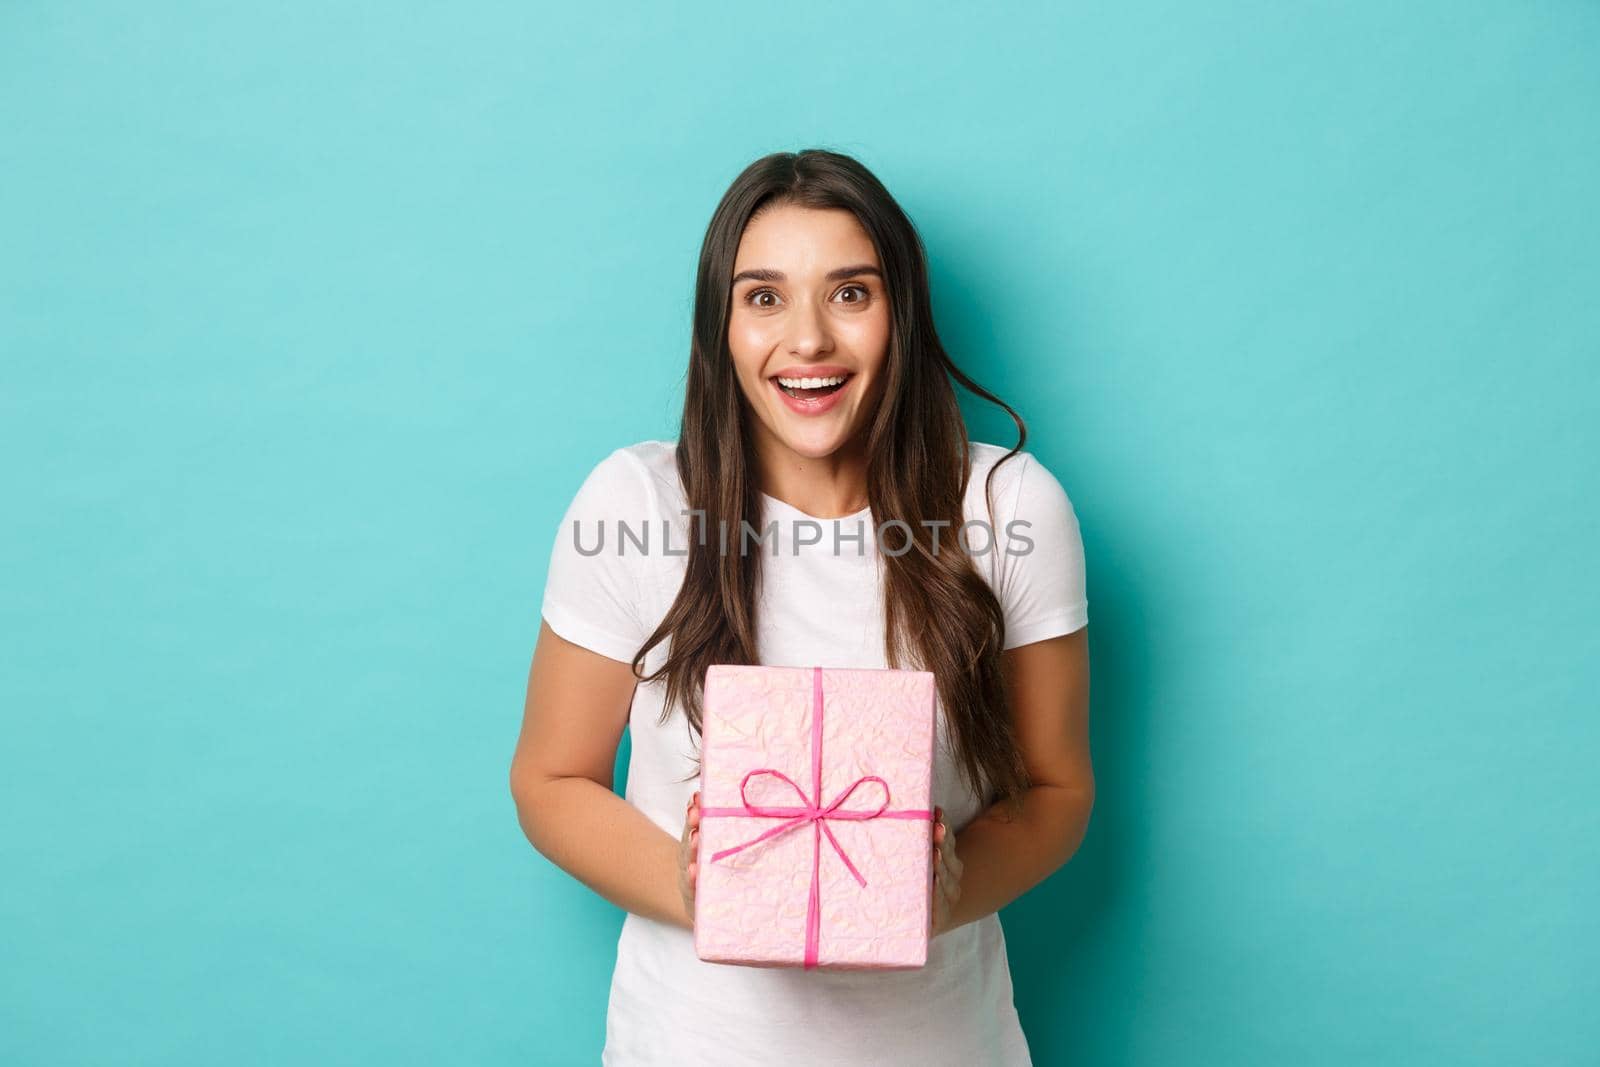 Concept of holidays and celebration. Image of excited woman looking happy, smiling and receiving gift wrapped in pink box, standing over blue background.